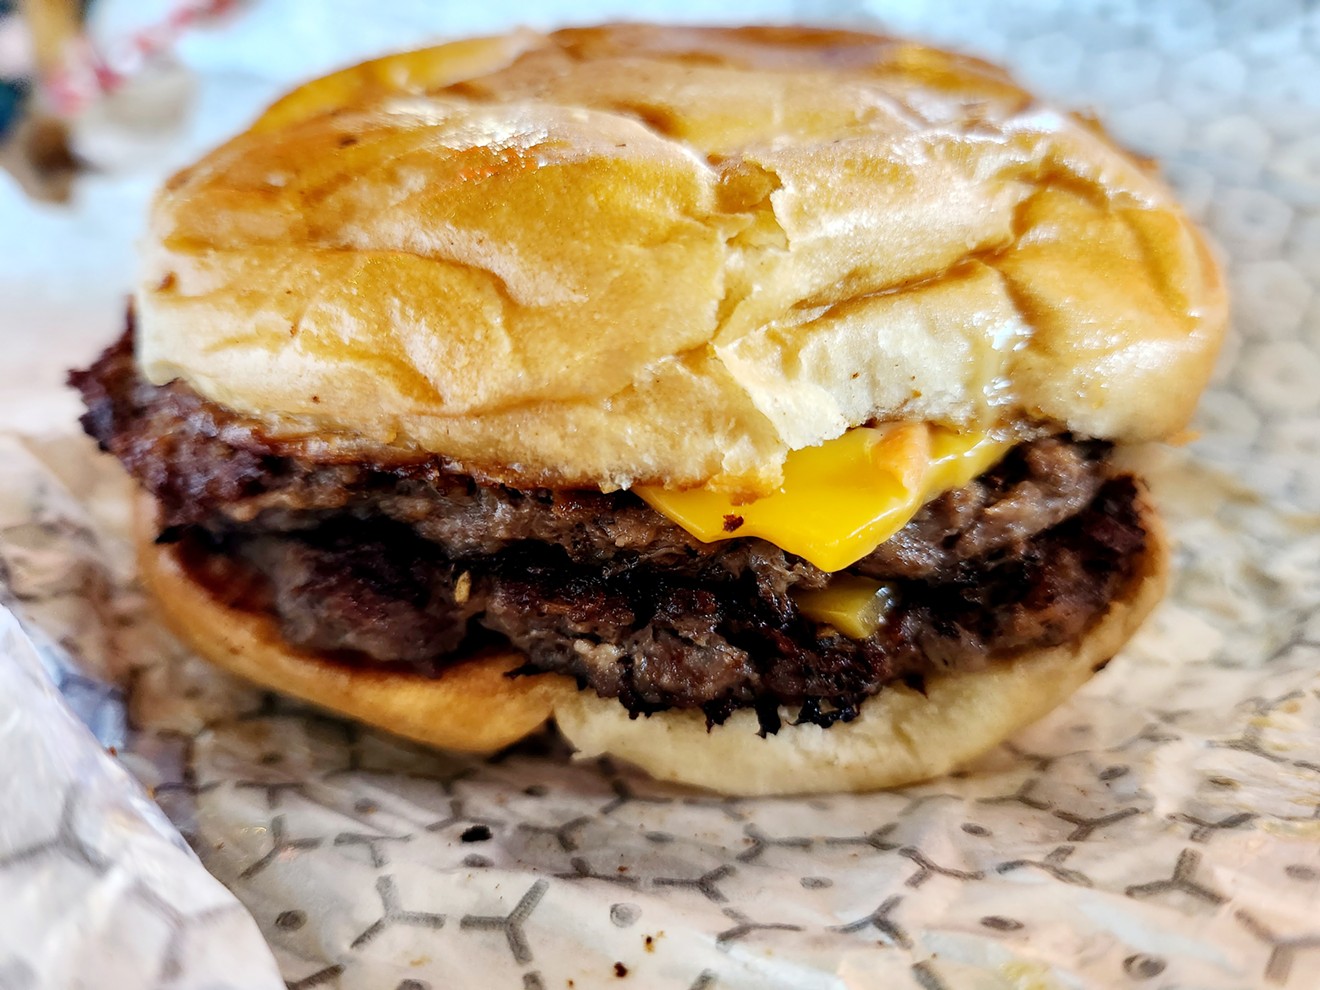 Hat Creek Burger Company restaurants are popping up all over North Texas.